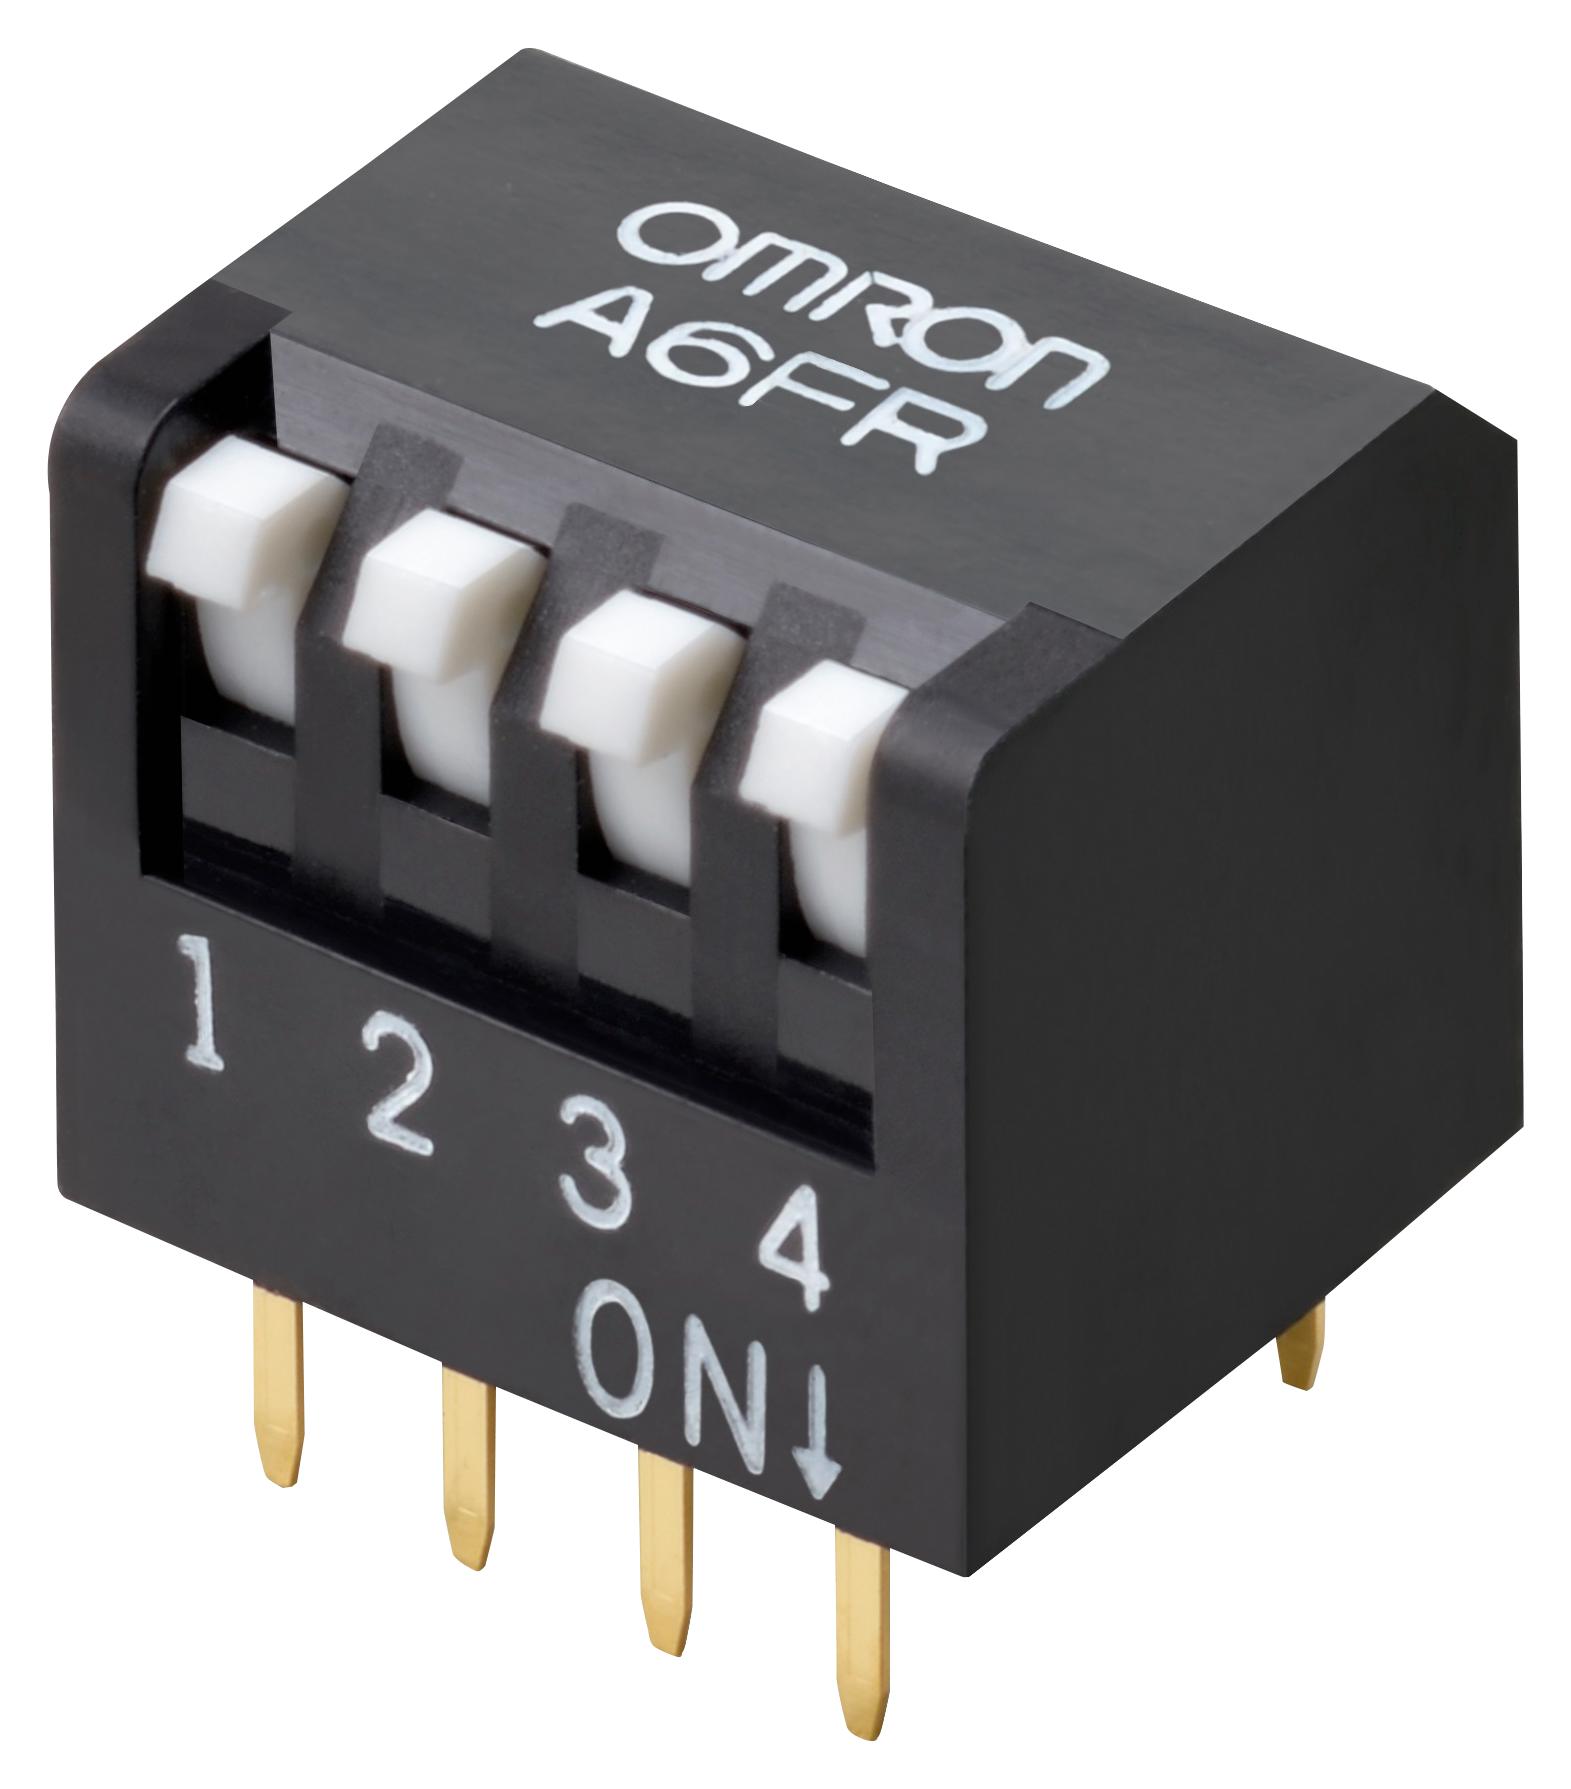 A6FR-3101 DIP SWITCH, 3POS, SPST, PIANO KEY, TH OMRON